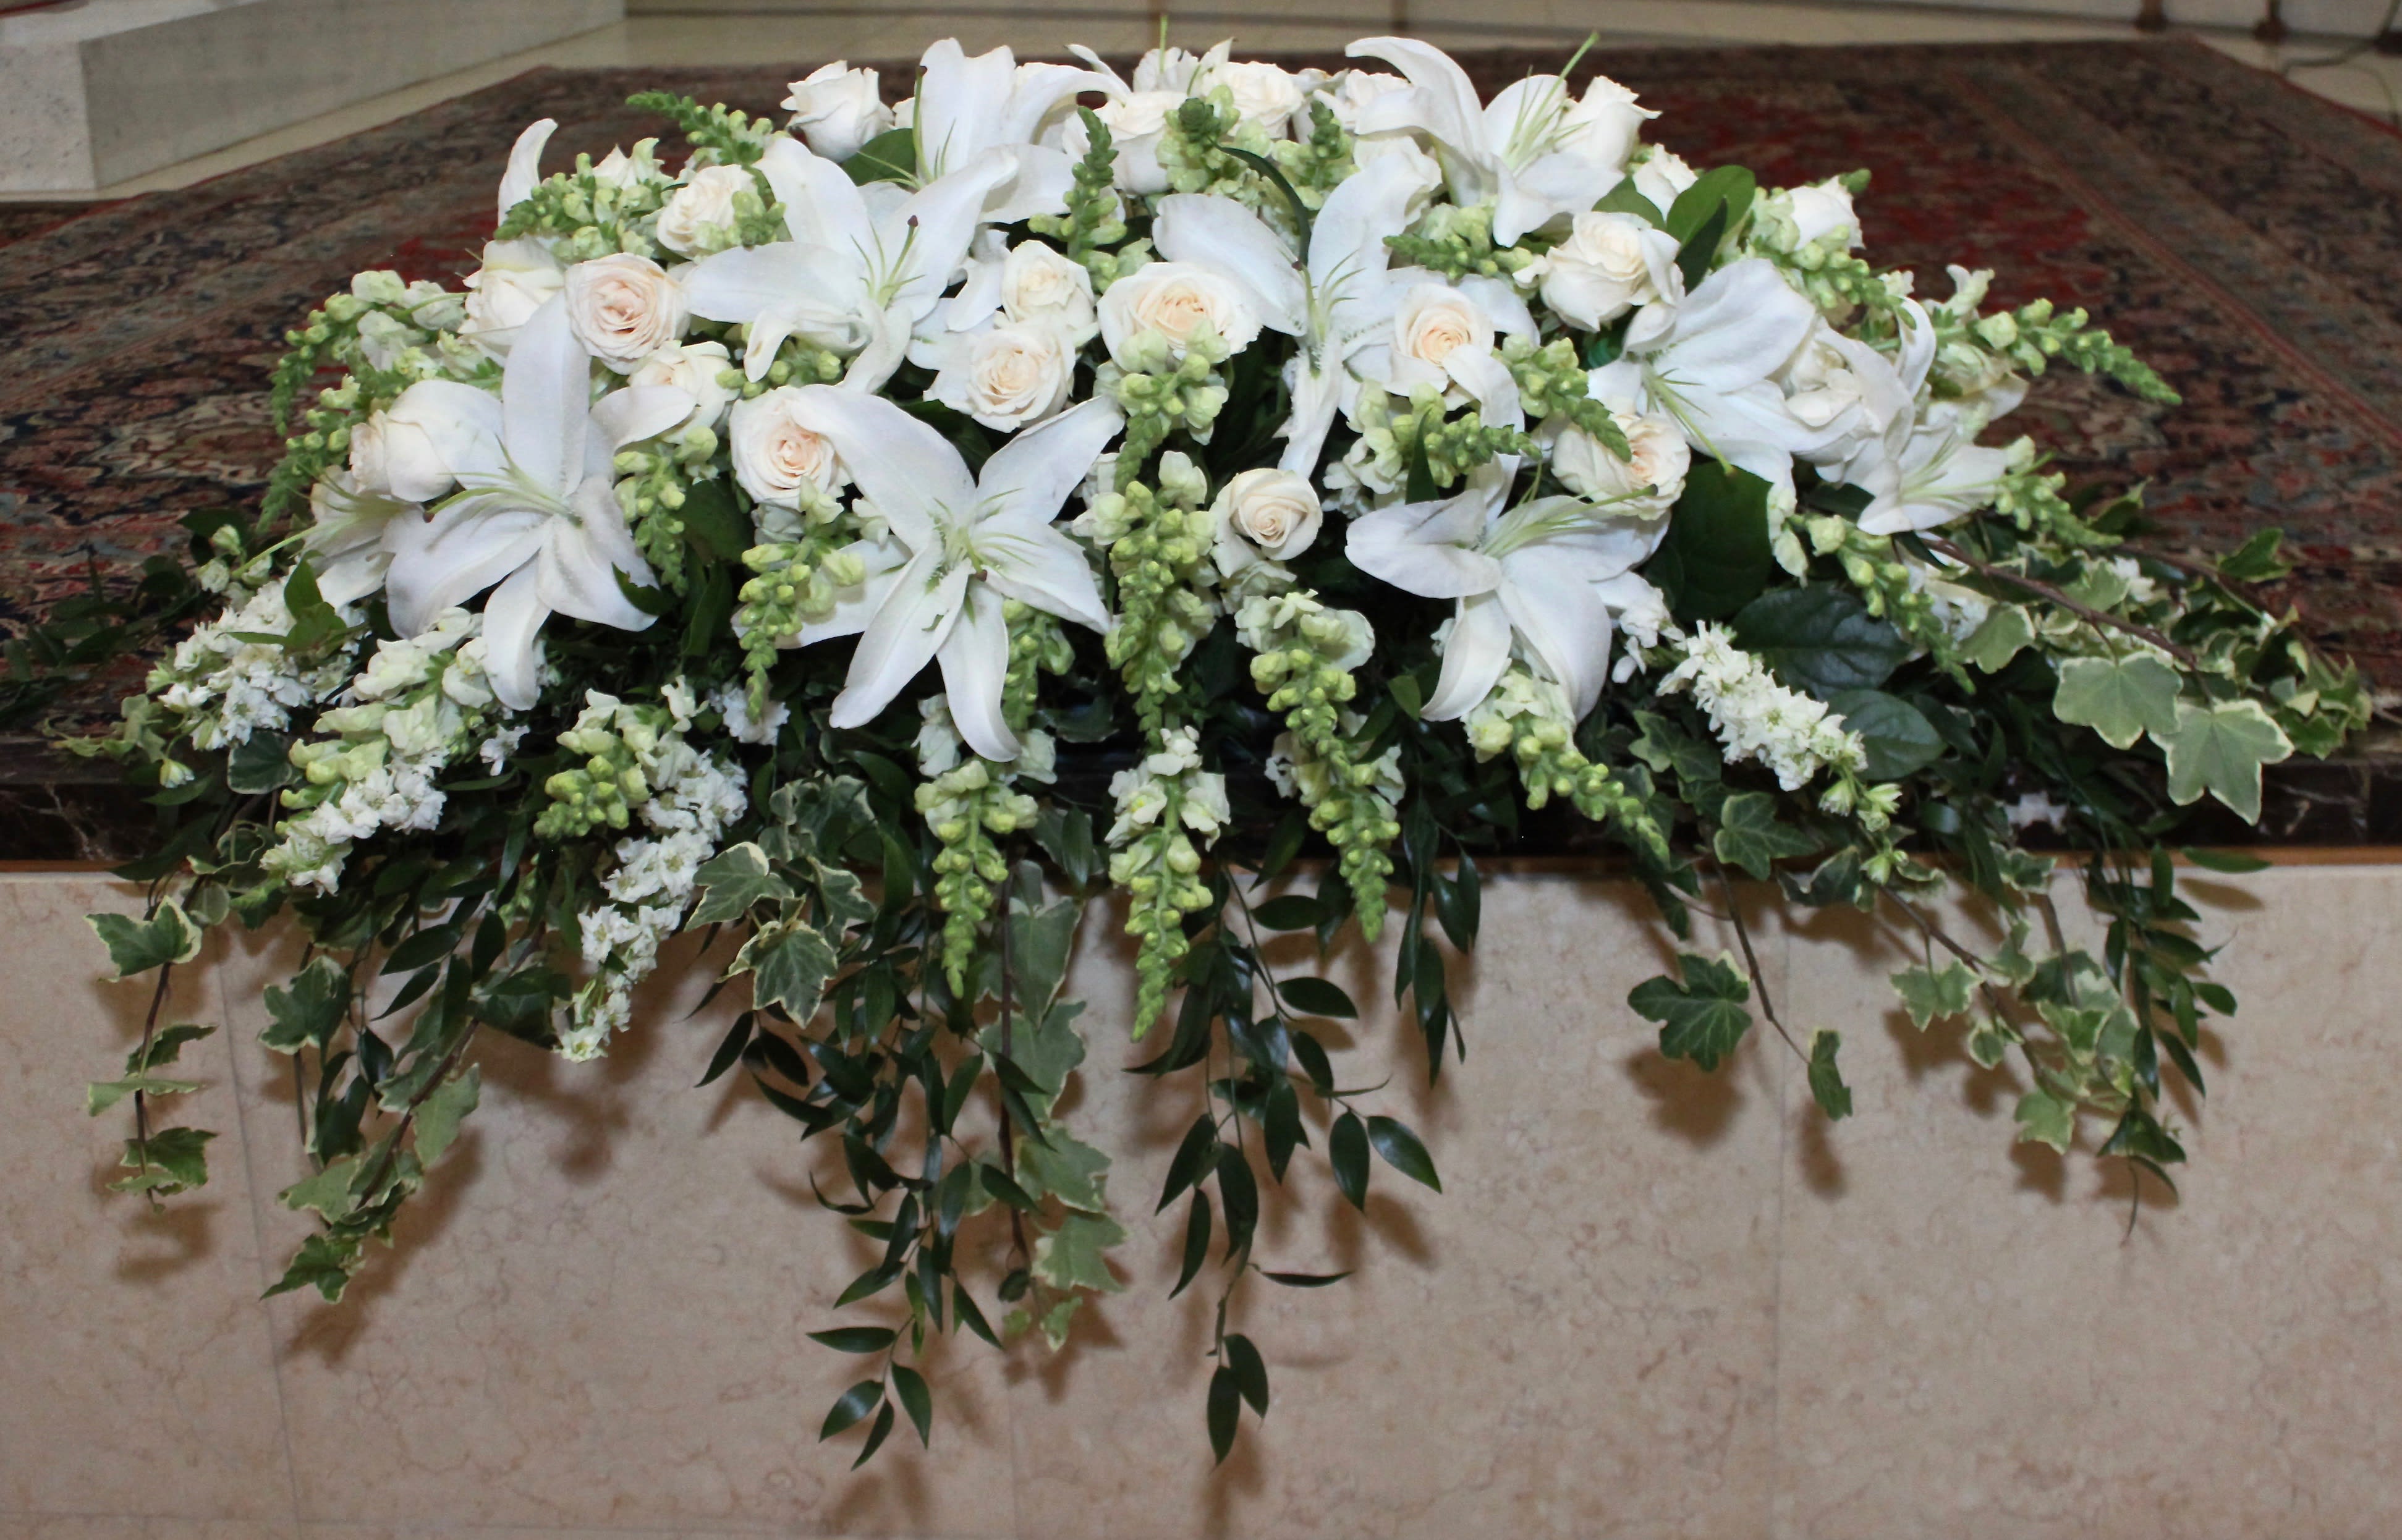 Ivy Stargazer Casket  - Full casket includes stargazer lilies and roses. We also include seasonal greens to this casket arrangement. 